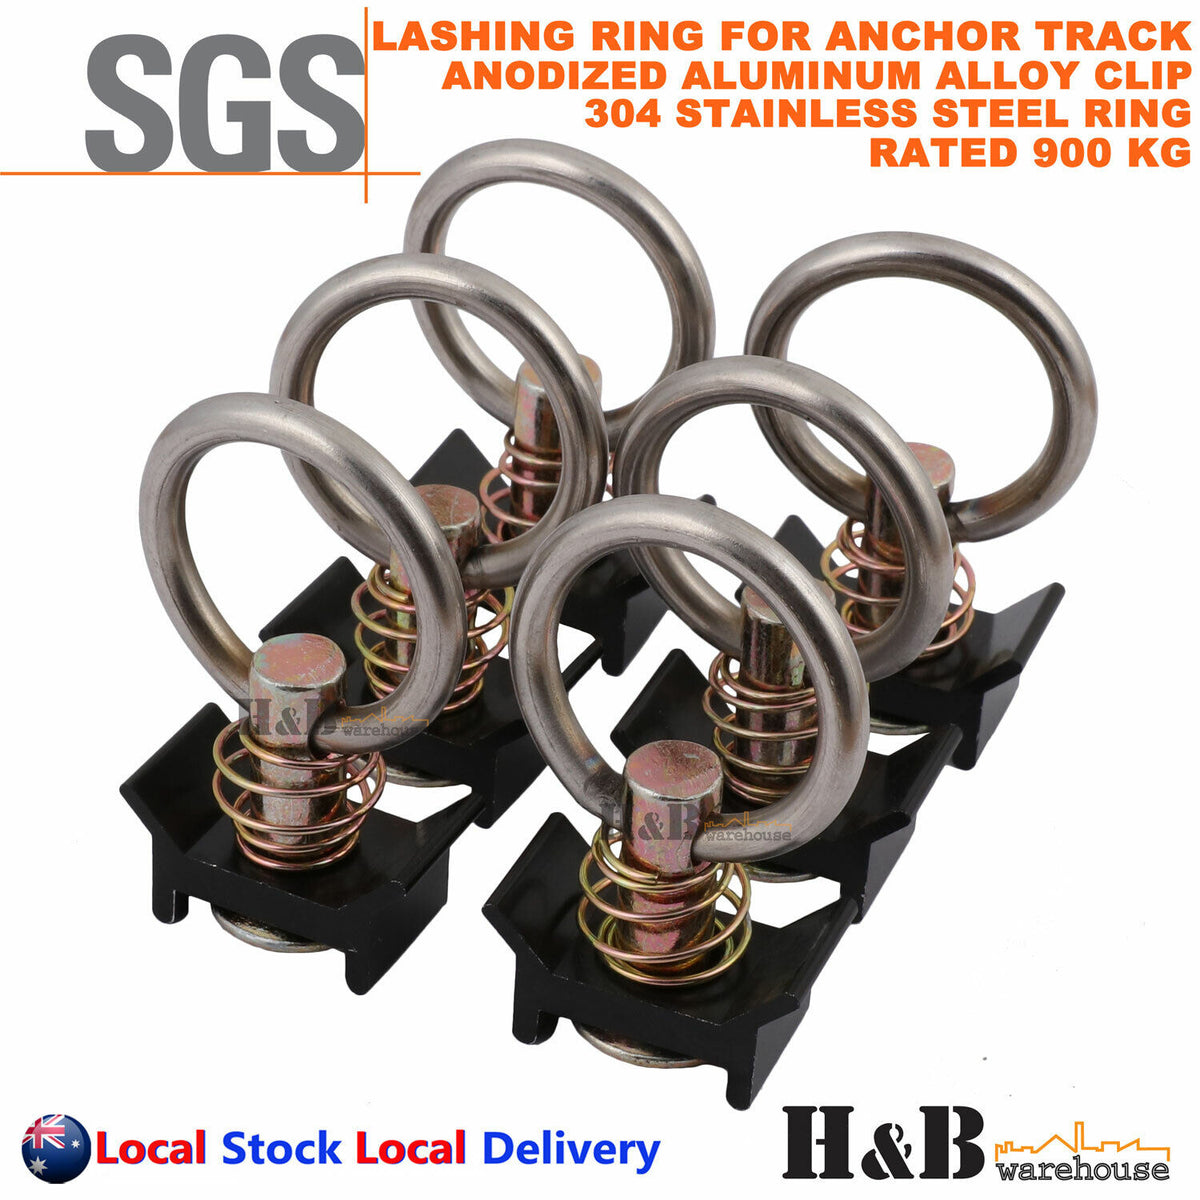 6X Anchor Track Lashing point Ring Clip 900KG Rated Trailer Truck Ute